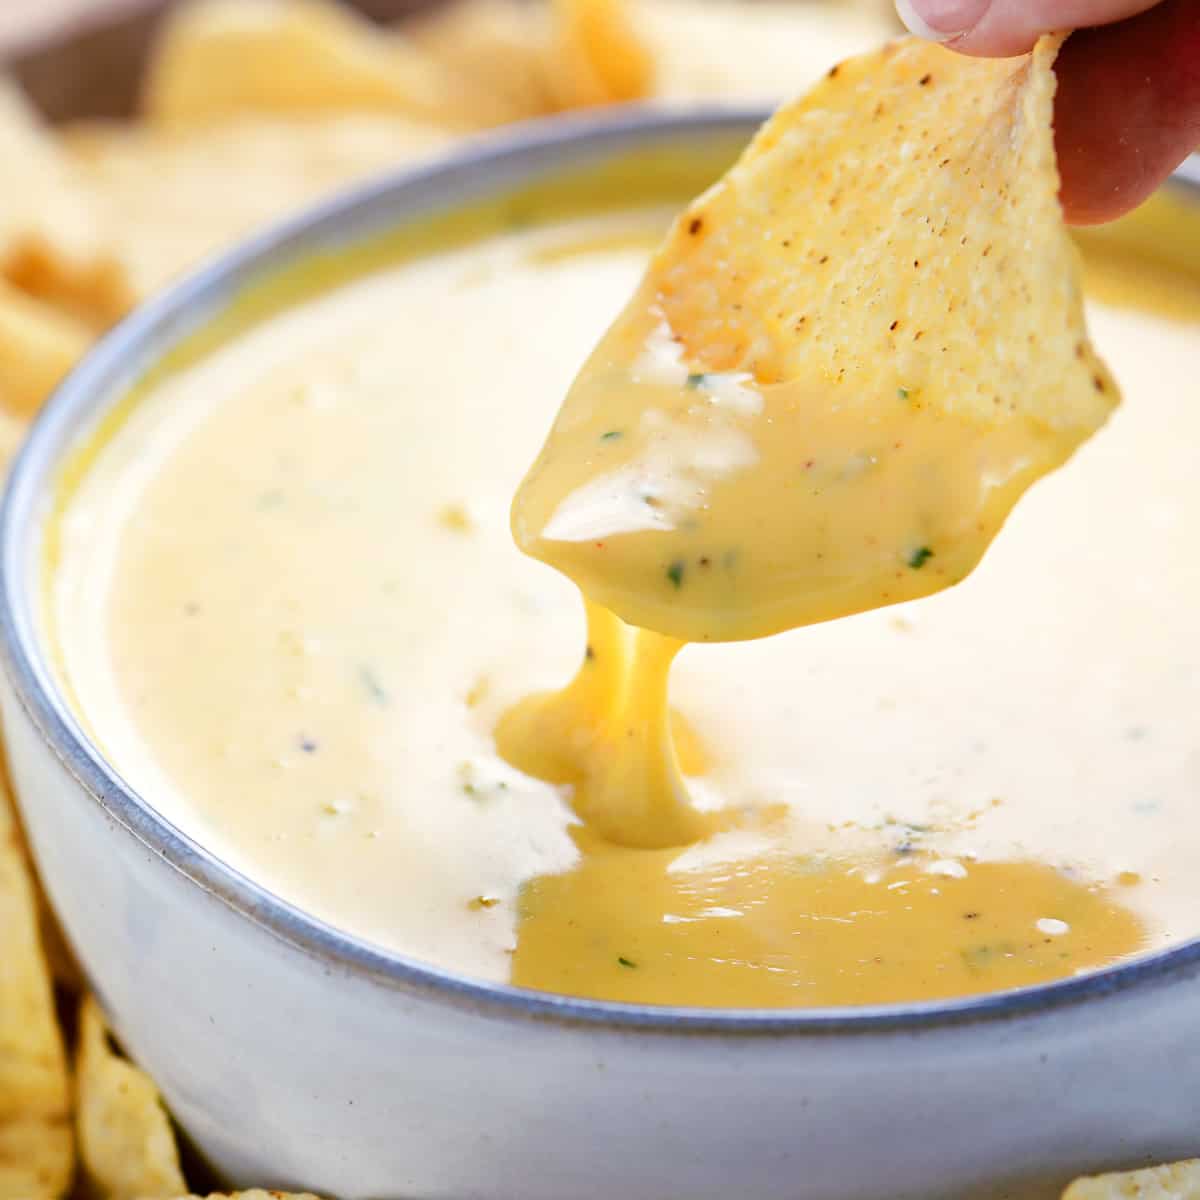 A chip dipped in homemade queso.